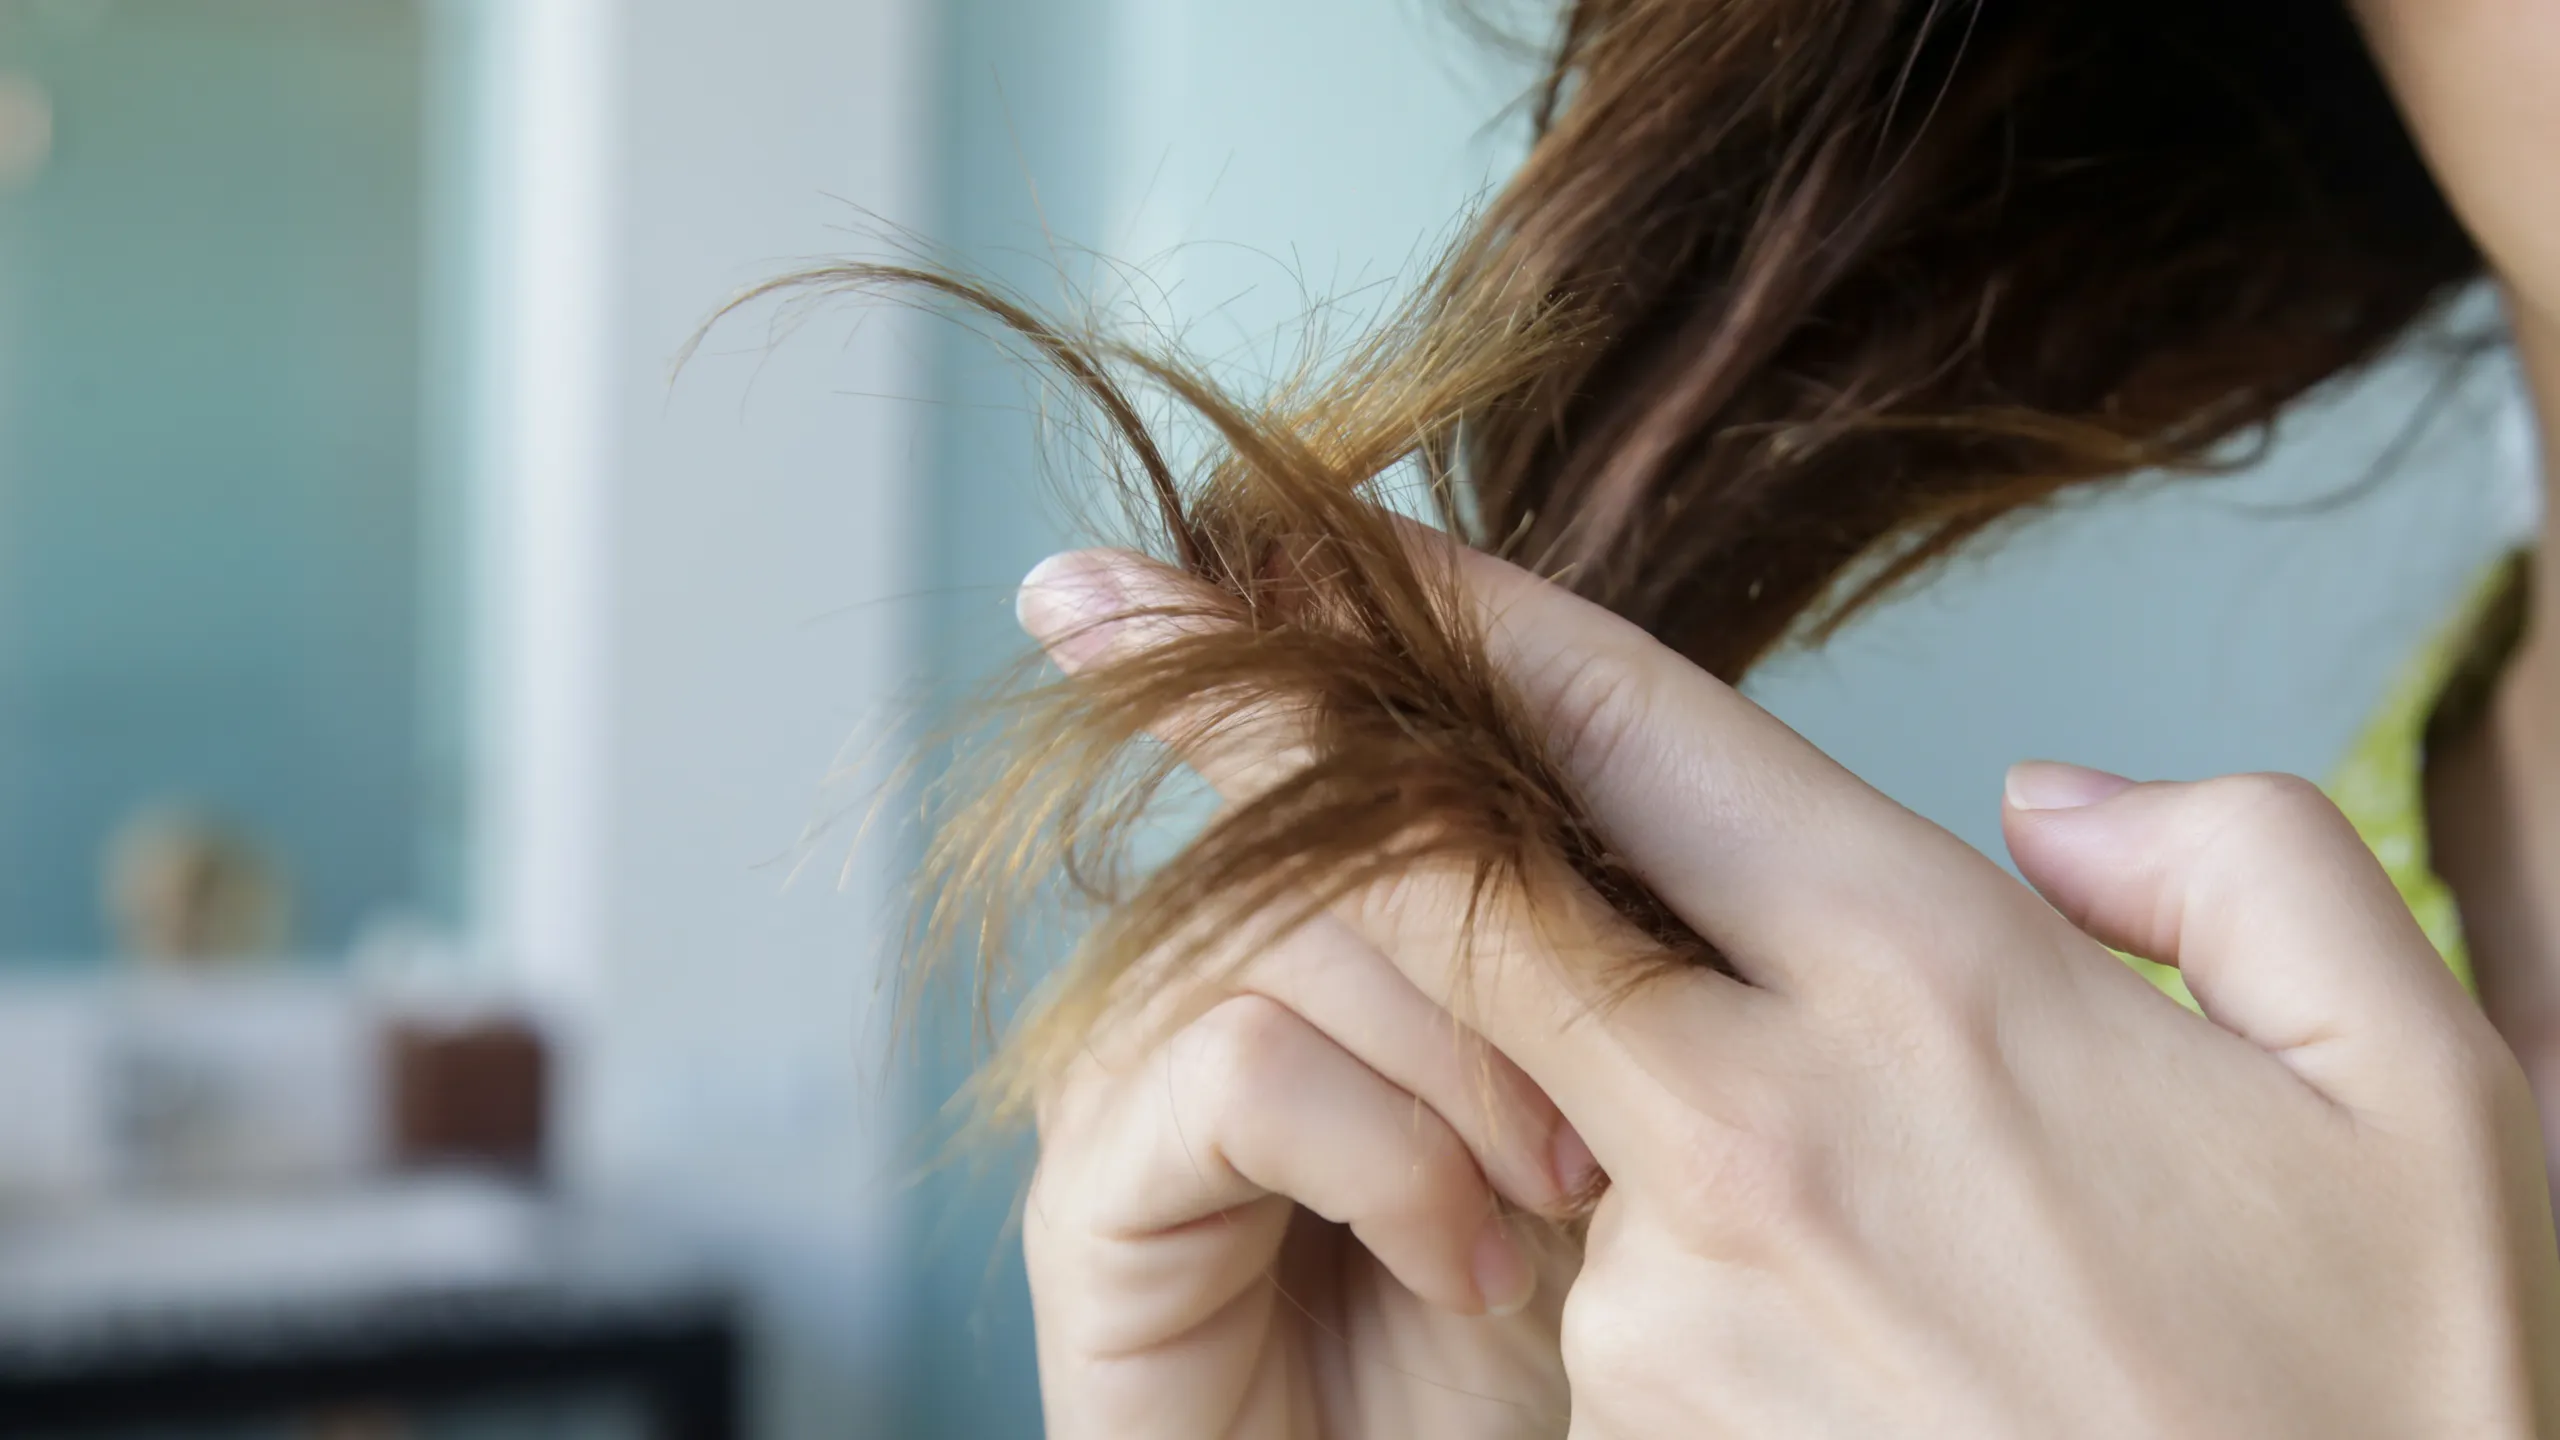 Can You Put Lotion Your Hair? The Benefits Risks